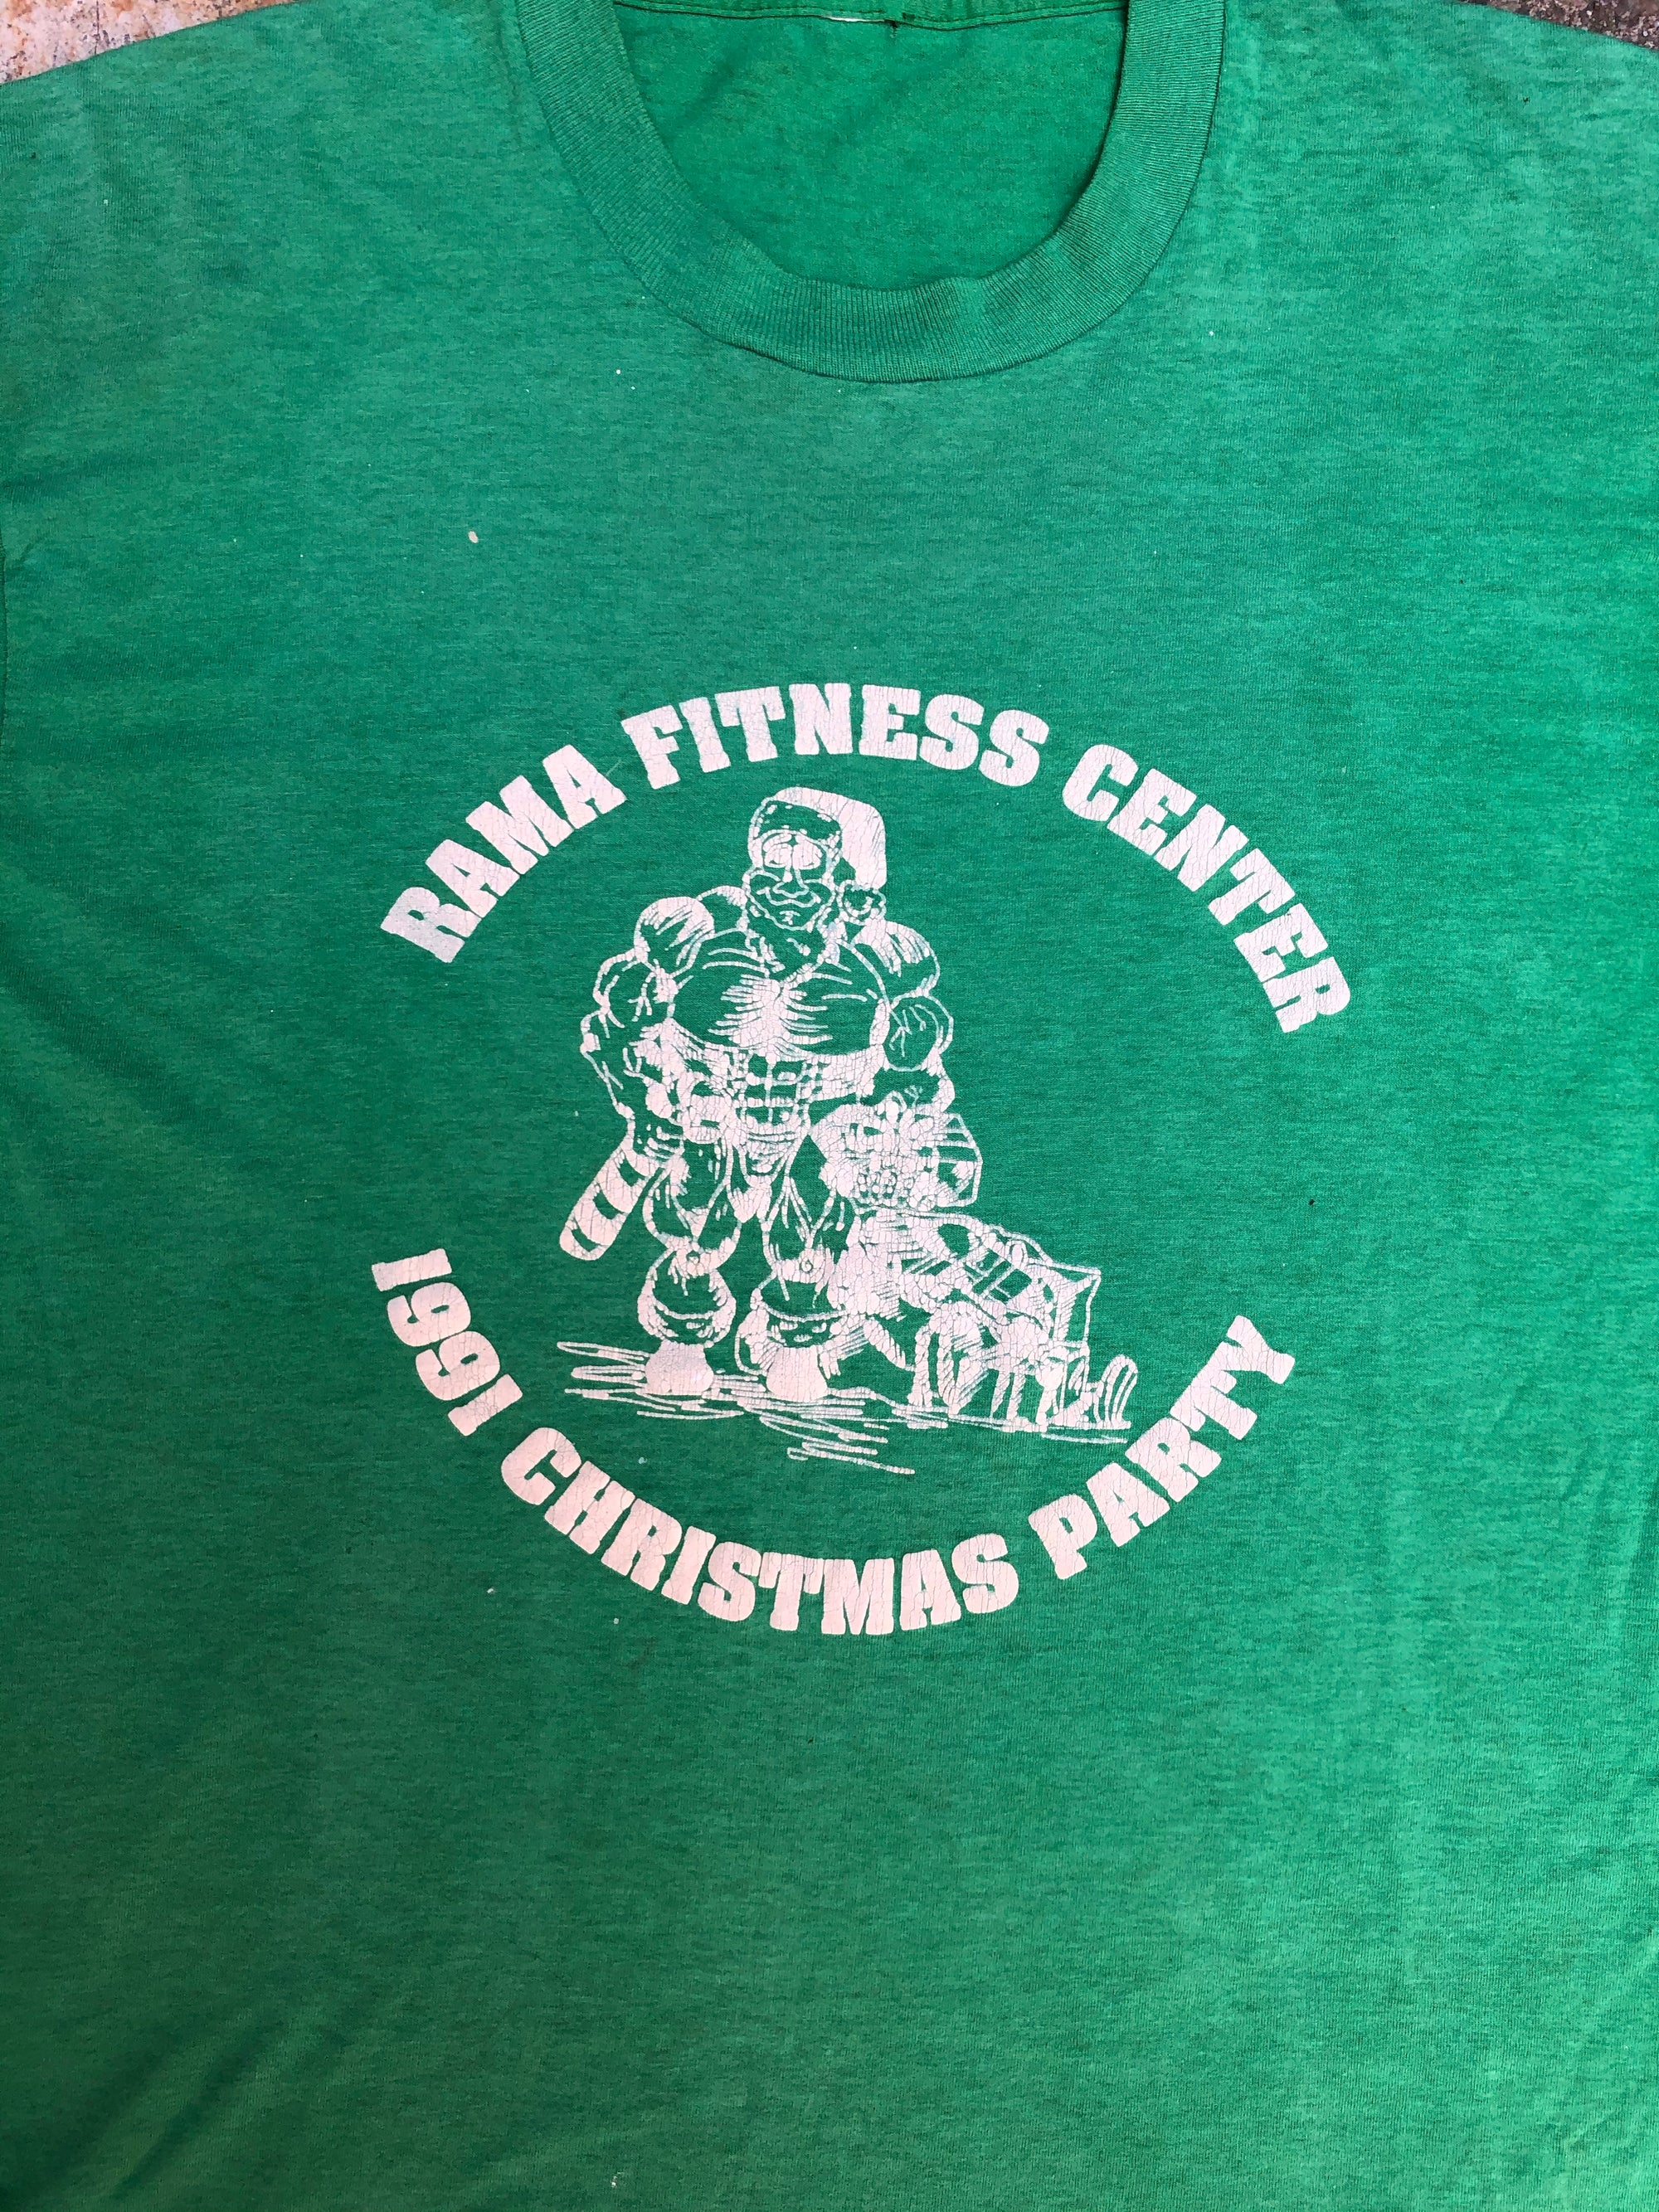 1990s Green "Fitness Center Christmas Party" Tee